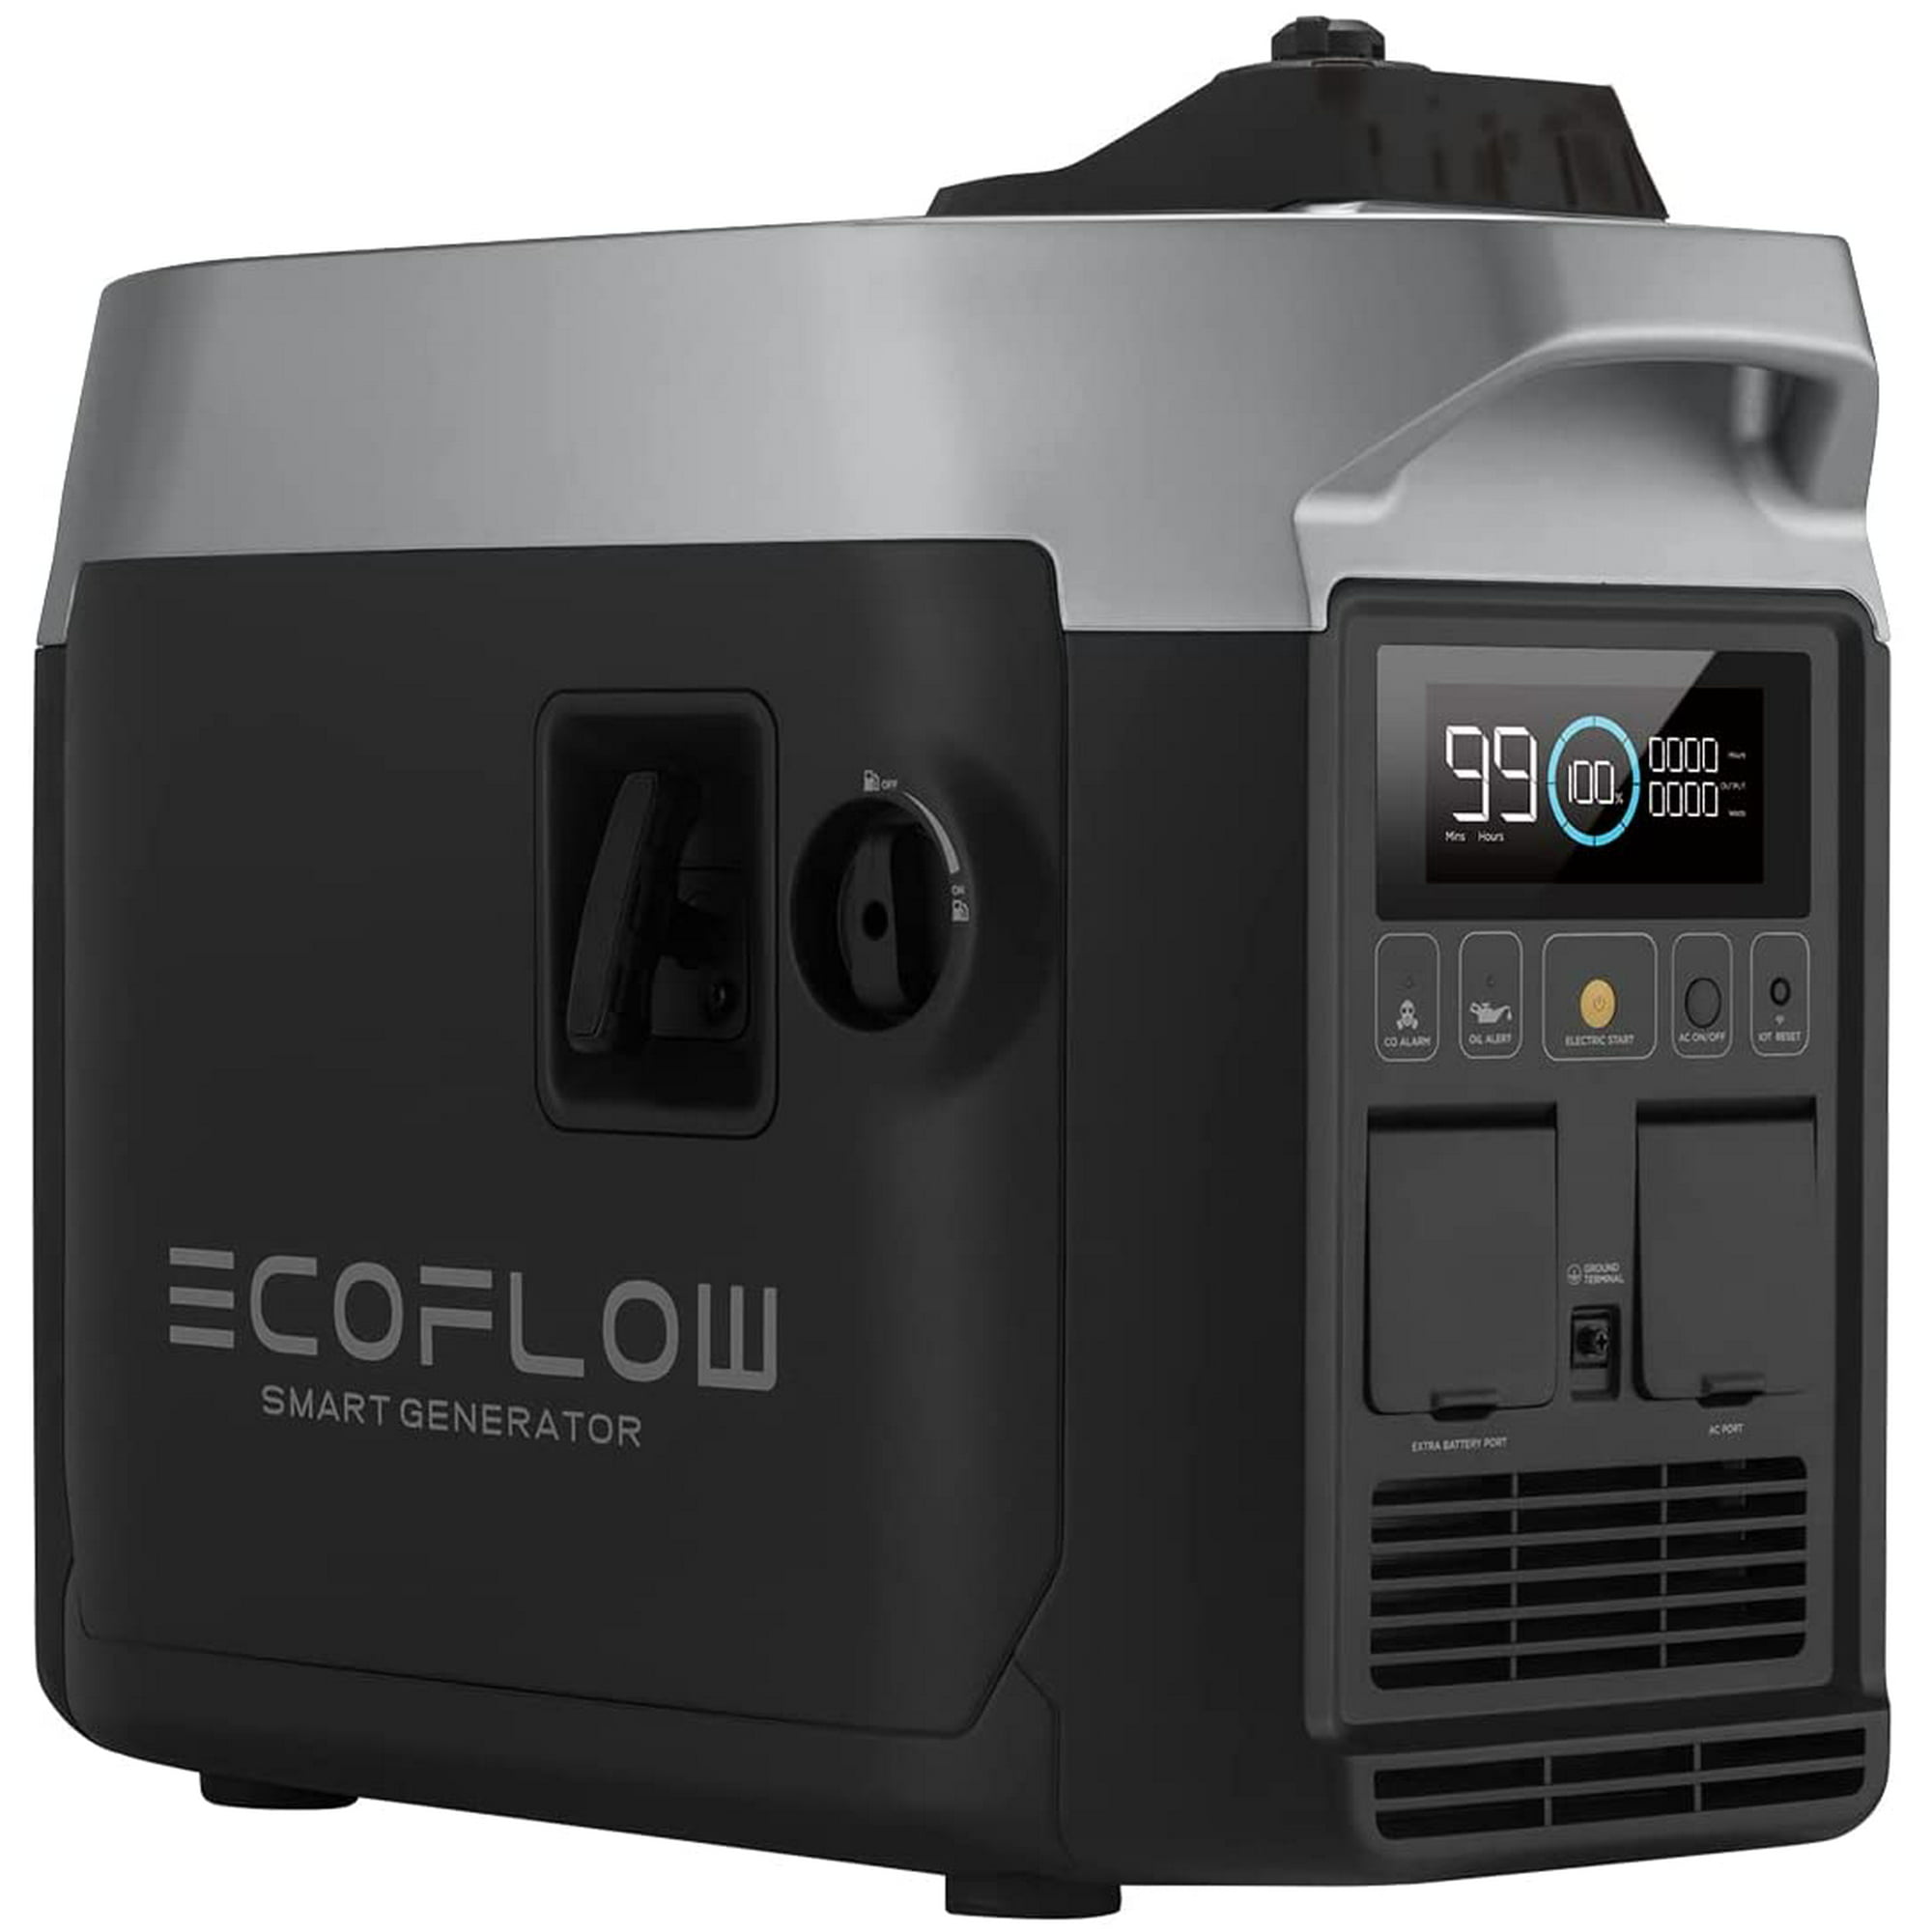 EcoFlow Smart Generator,Unleaded Gasoline 4L Inverter Generator,Integrates With Delta Pro and Delta Max,1800W AC Output,for Outdoor Camping,Home Walmart.com